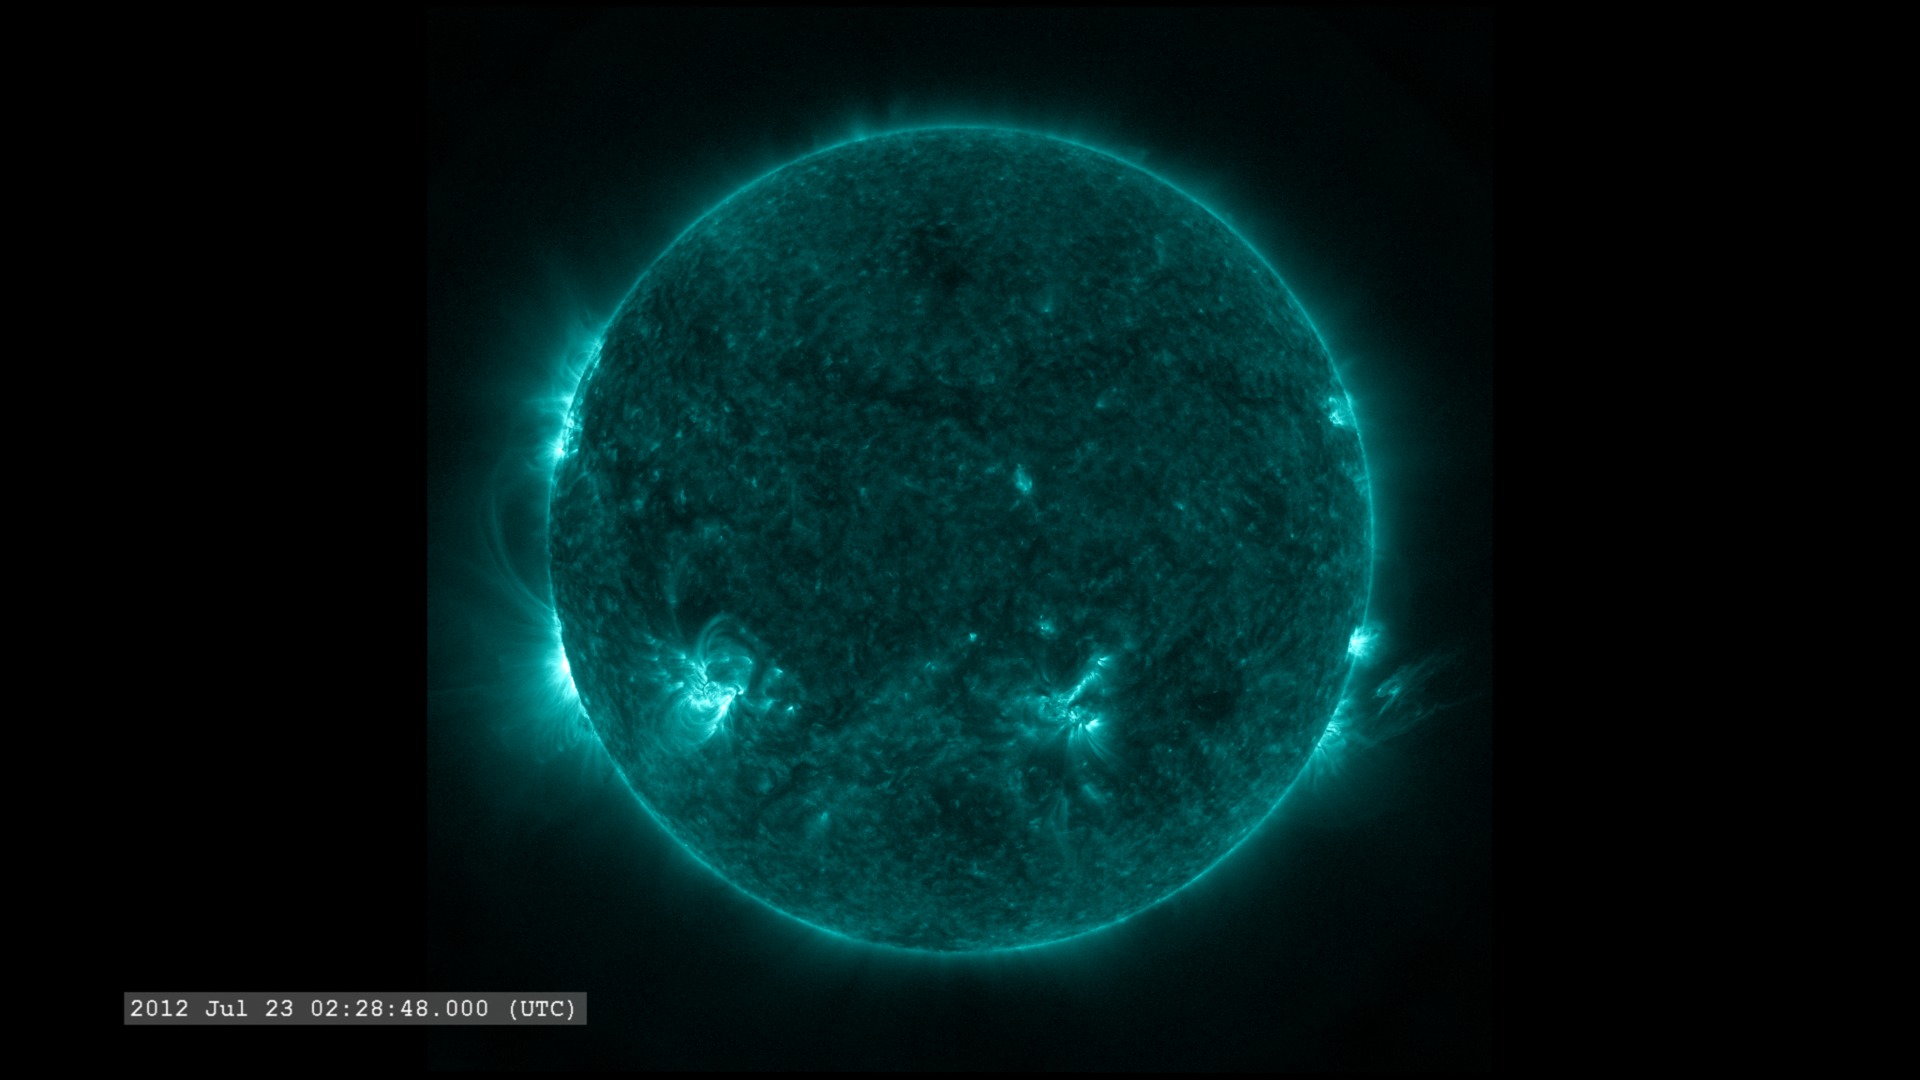 A view of the July 23, 2012 CME from AIA in the 131 angstrom filter.